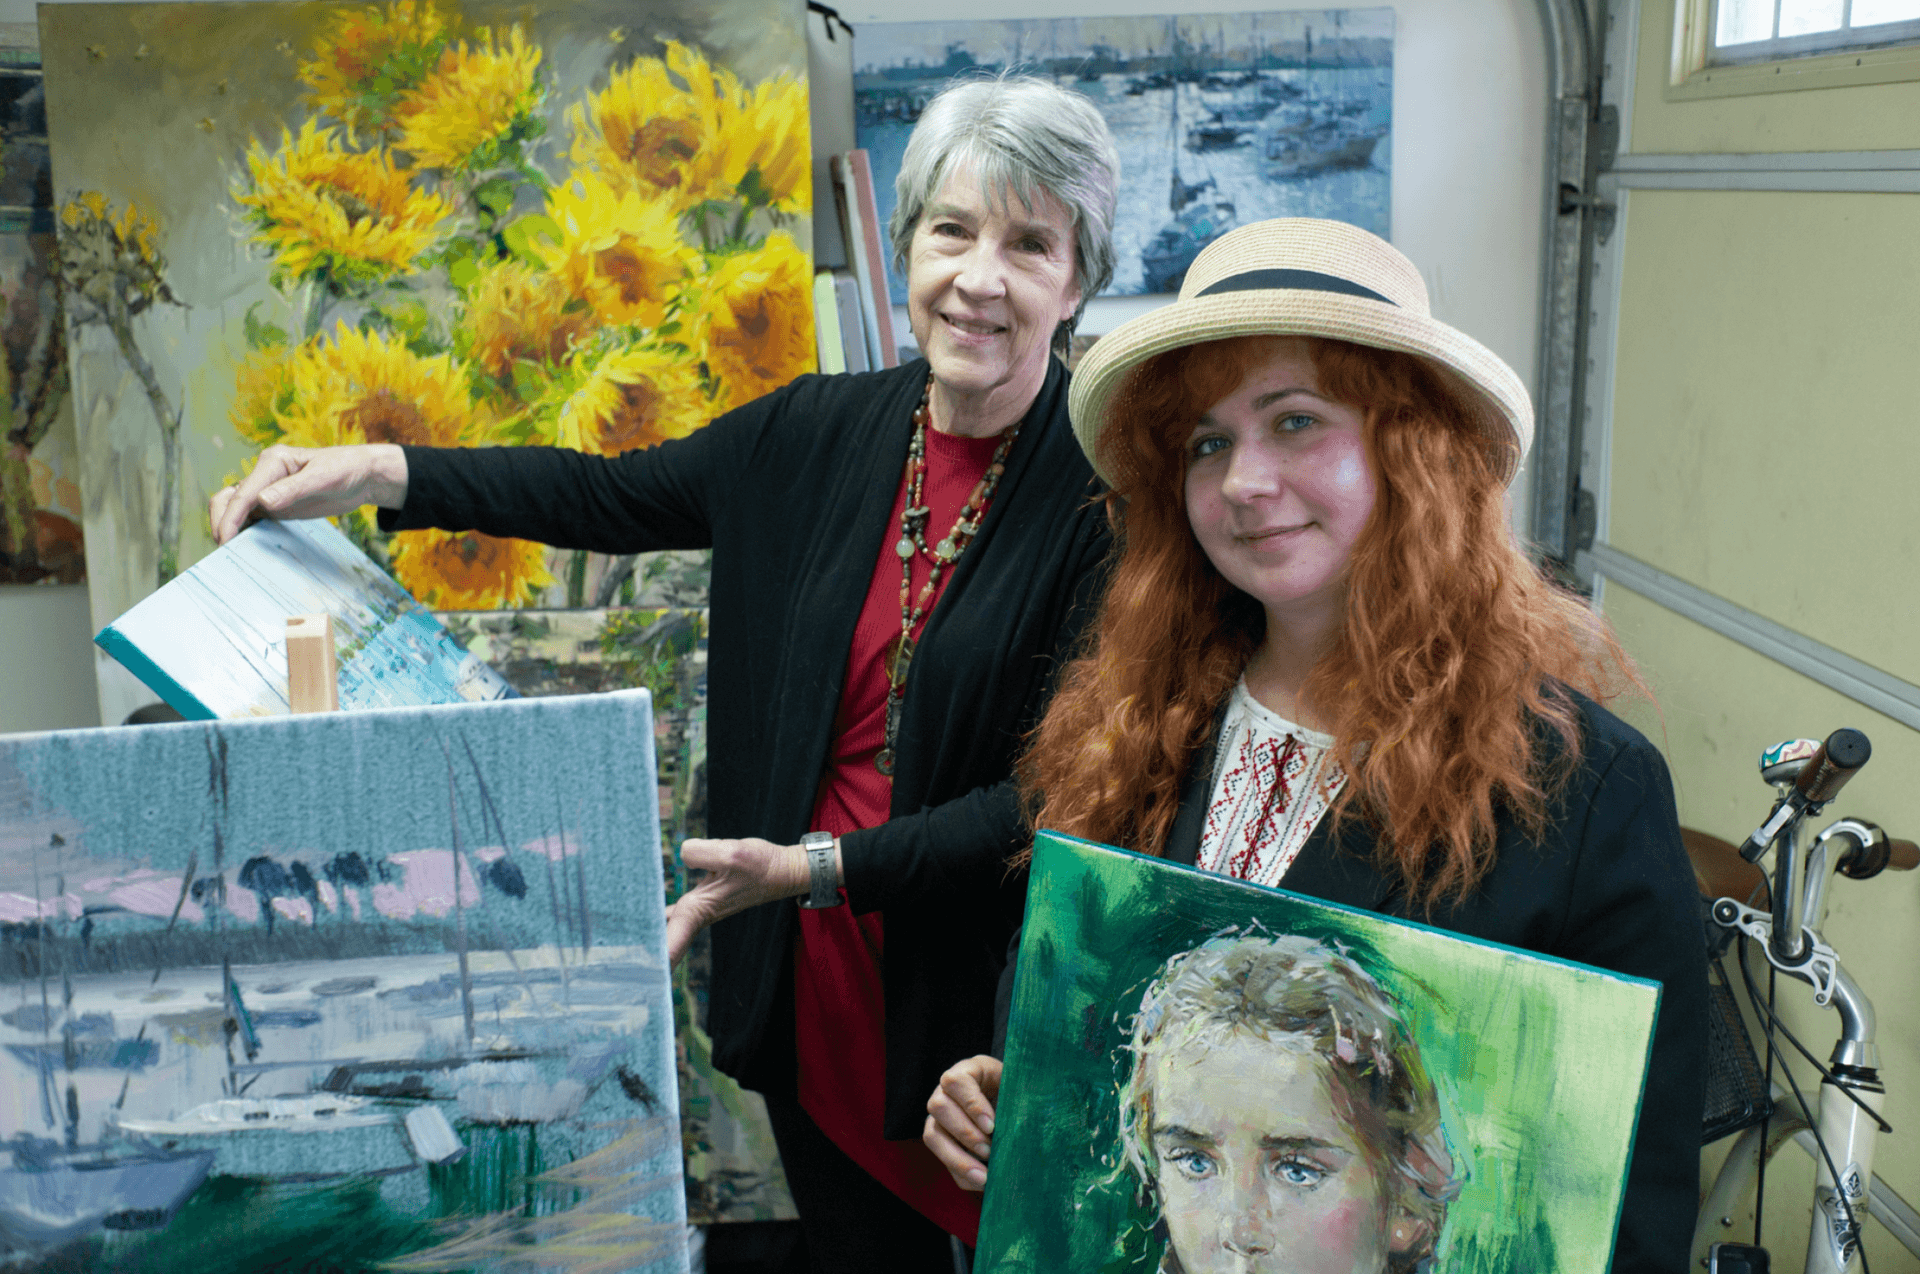 Ukrainian artist Vira Ustyanska with her host Connie Terwilliger in San Diego. At the garage-turned-art studio at Terwilliger's house, Ustyanska paints large canvases of sunflowers, her favorite subject.